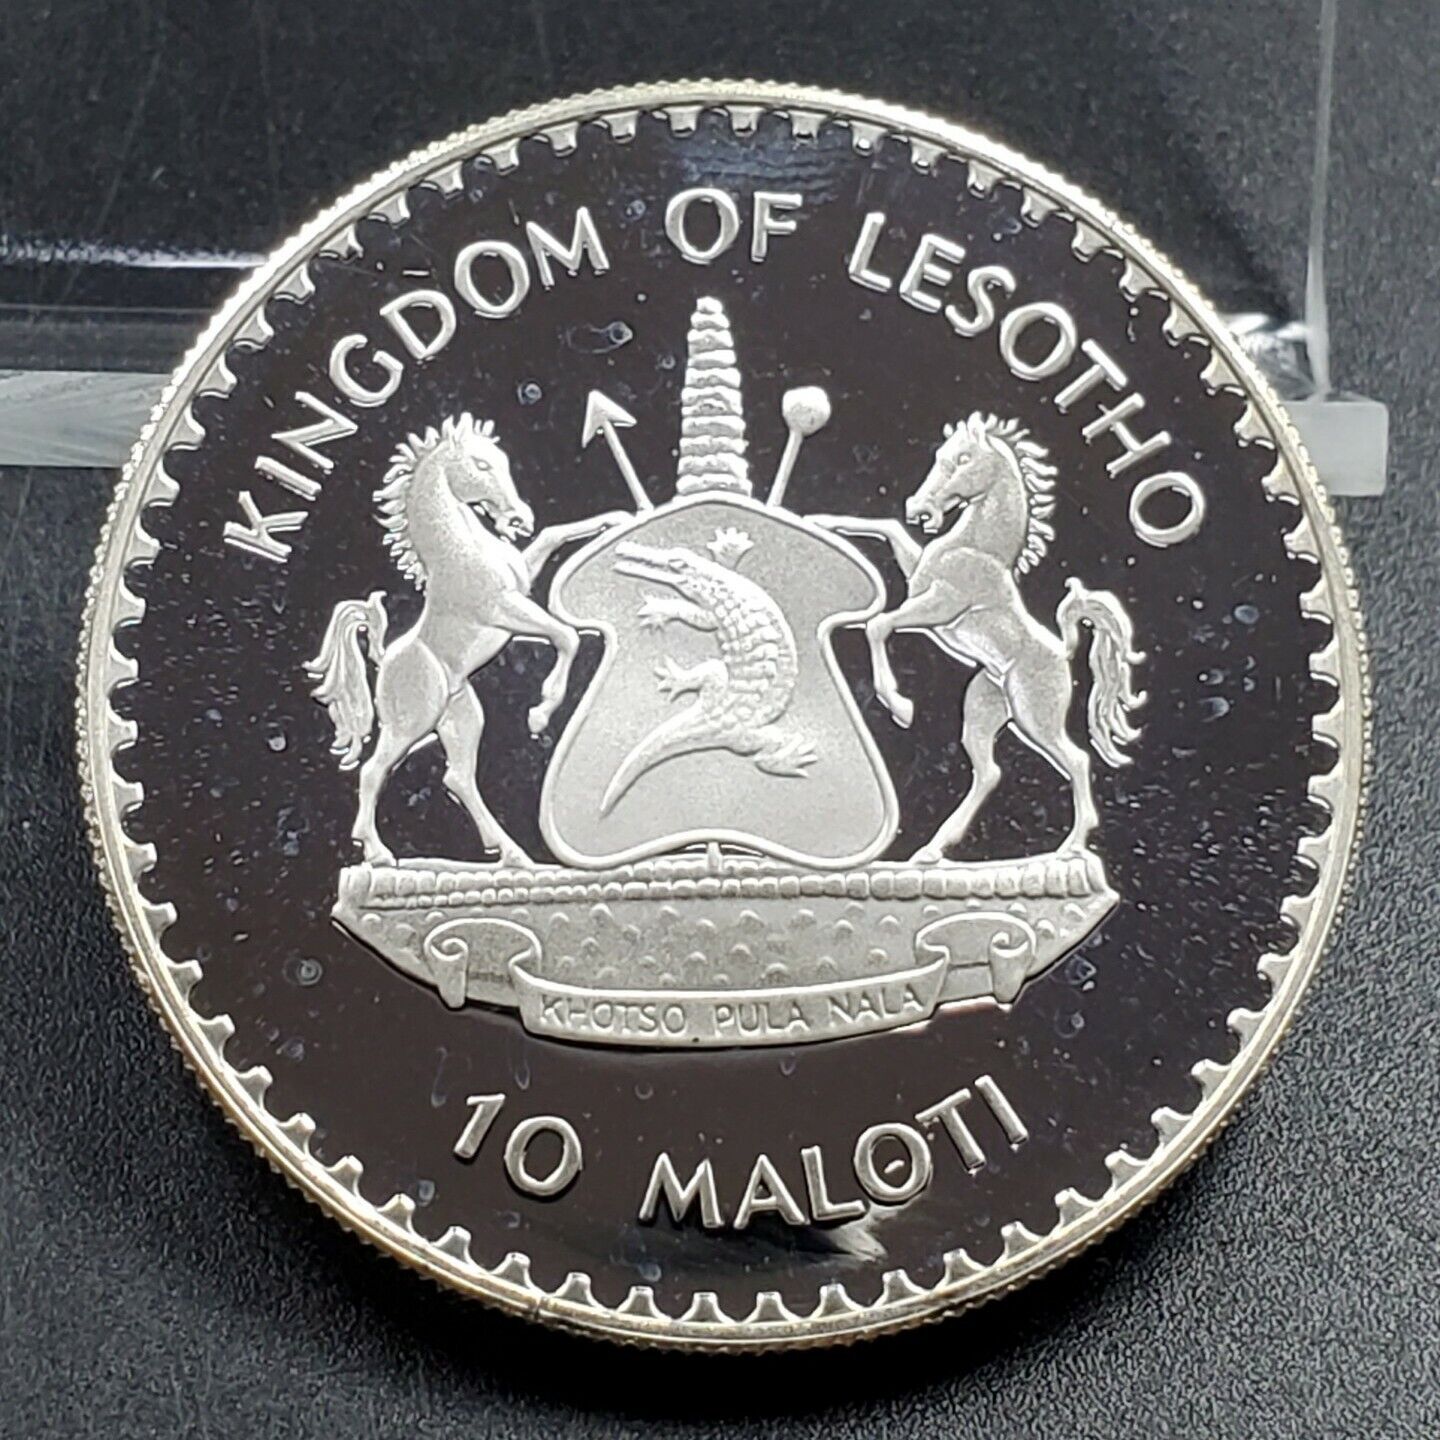 1982 Lesotho 10 Maloti Proof Silver Coin